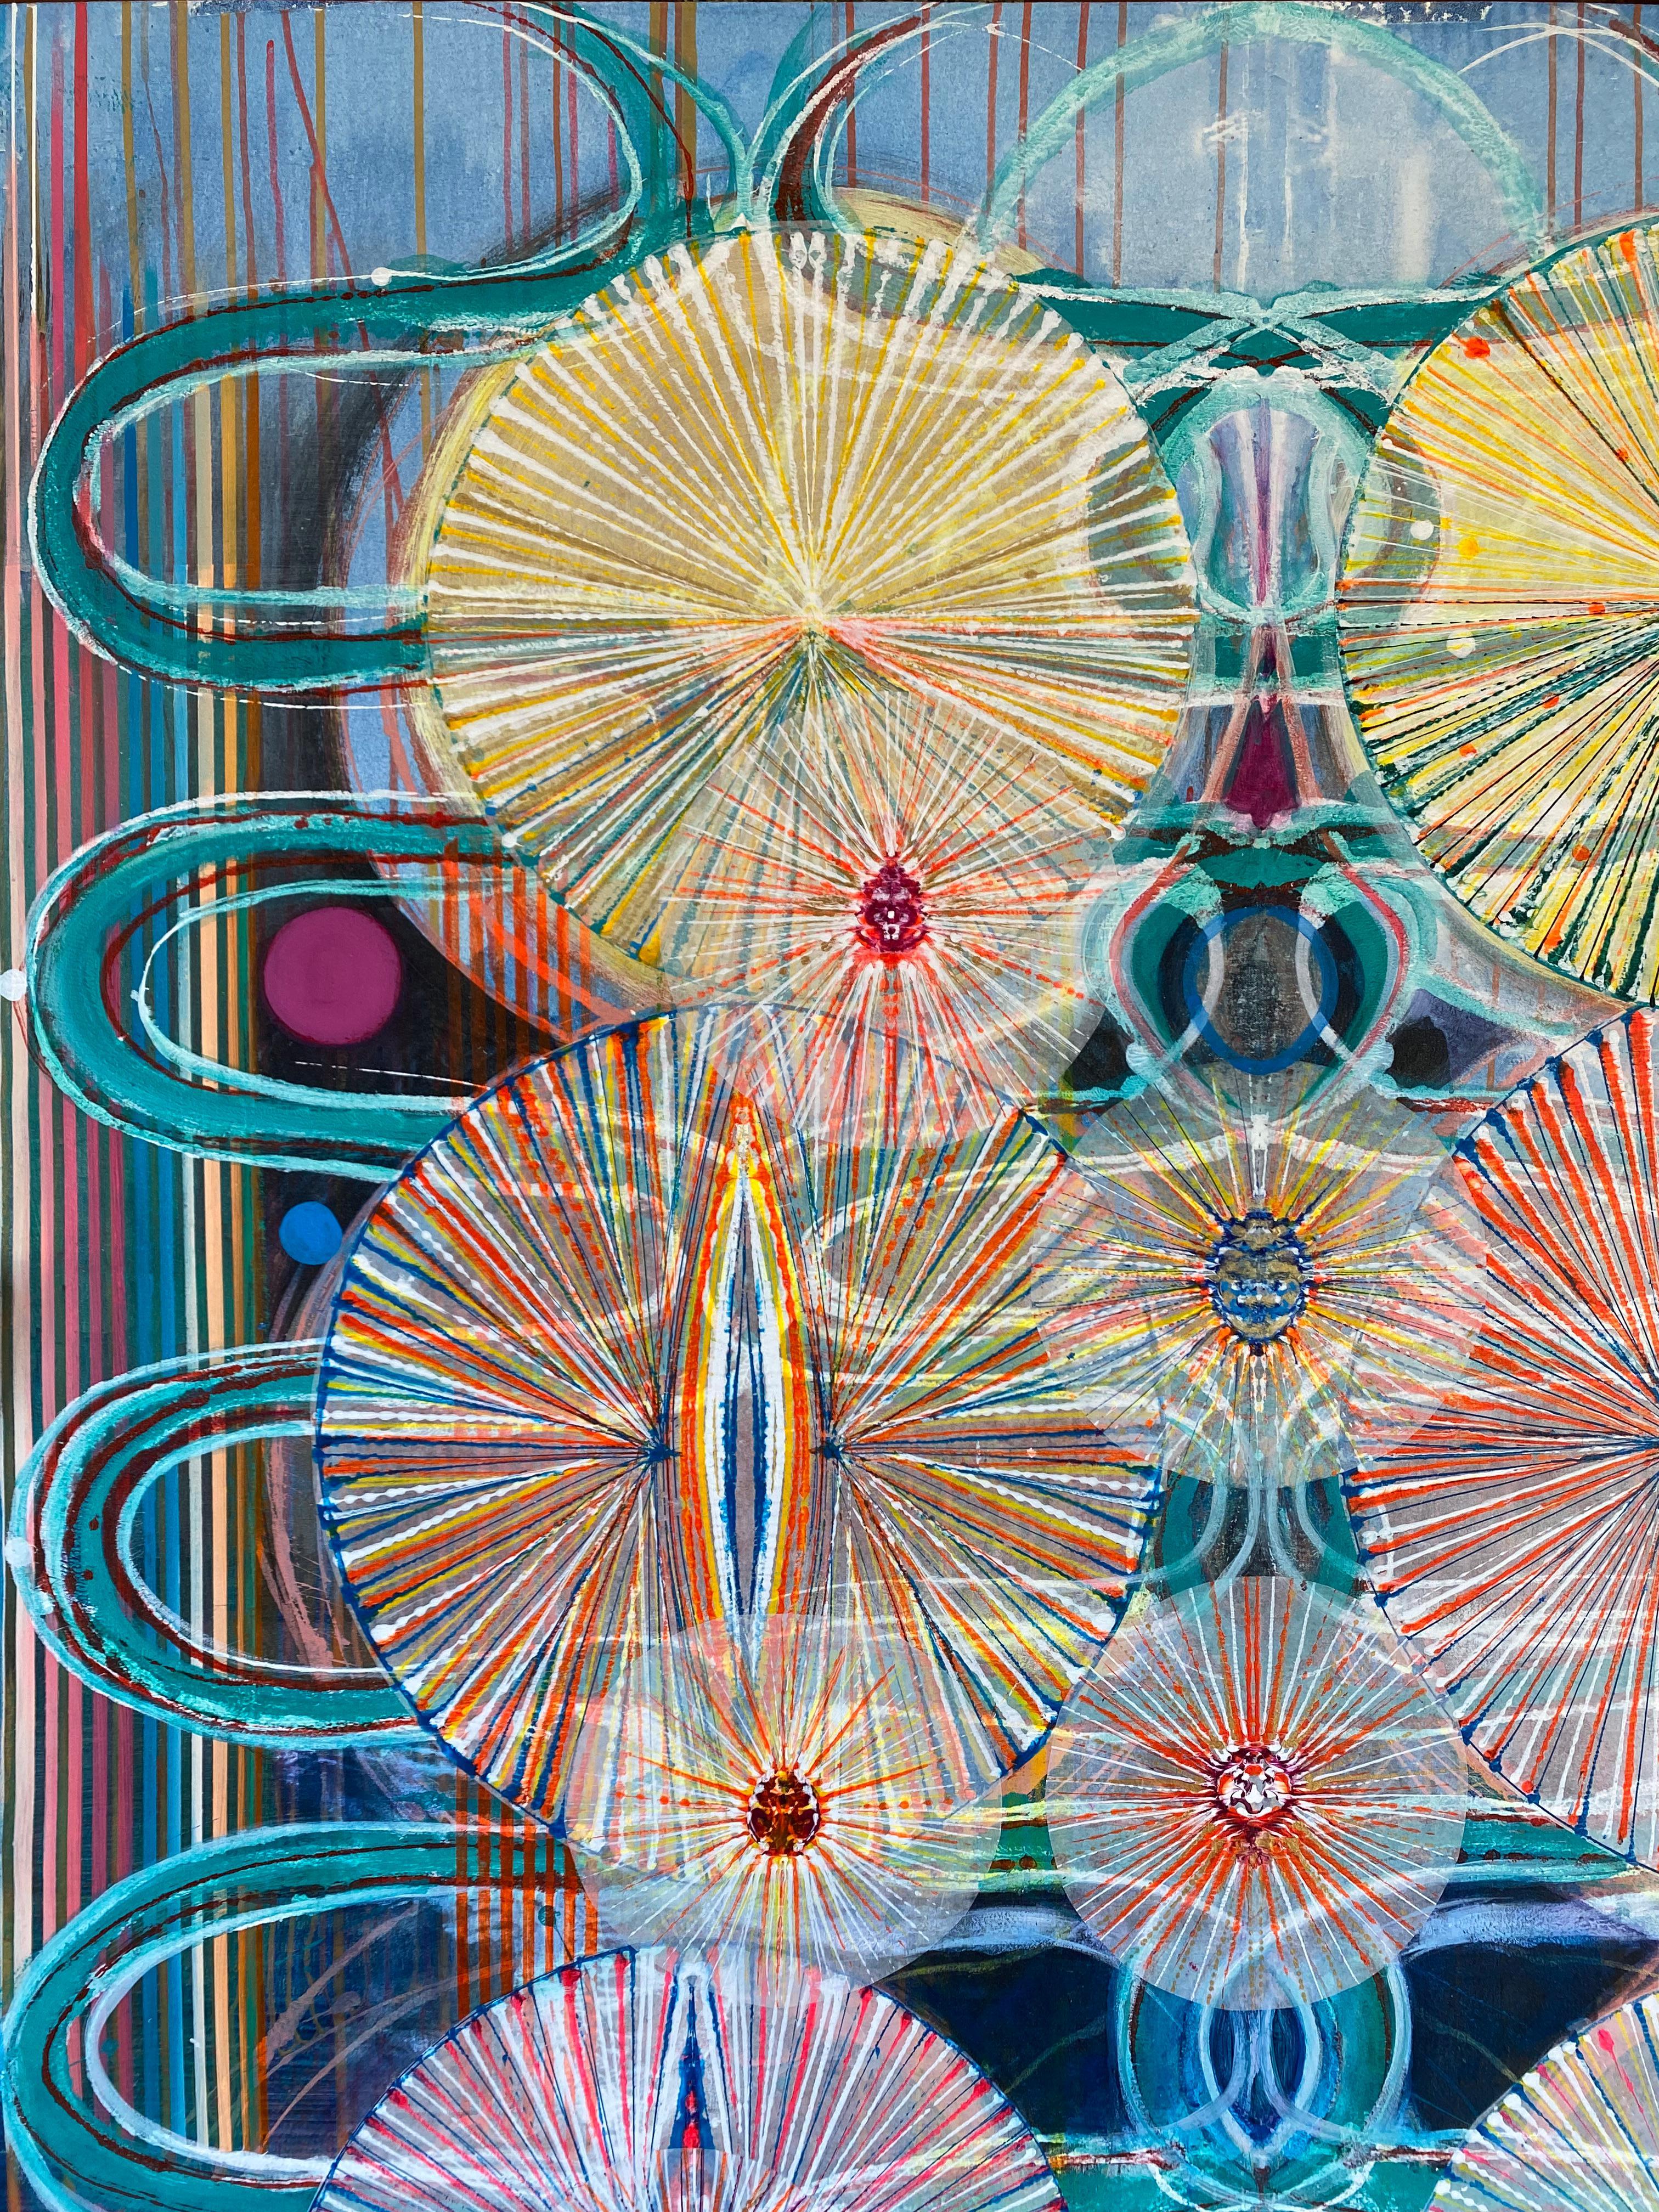 Rapt, Circles, Undulating Lines, Sky Blue, Red, Teal, Yellow, Purple - Gray Abstract Painting by Susan Chrysler White